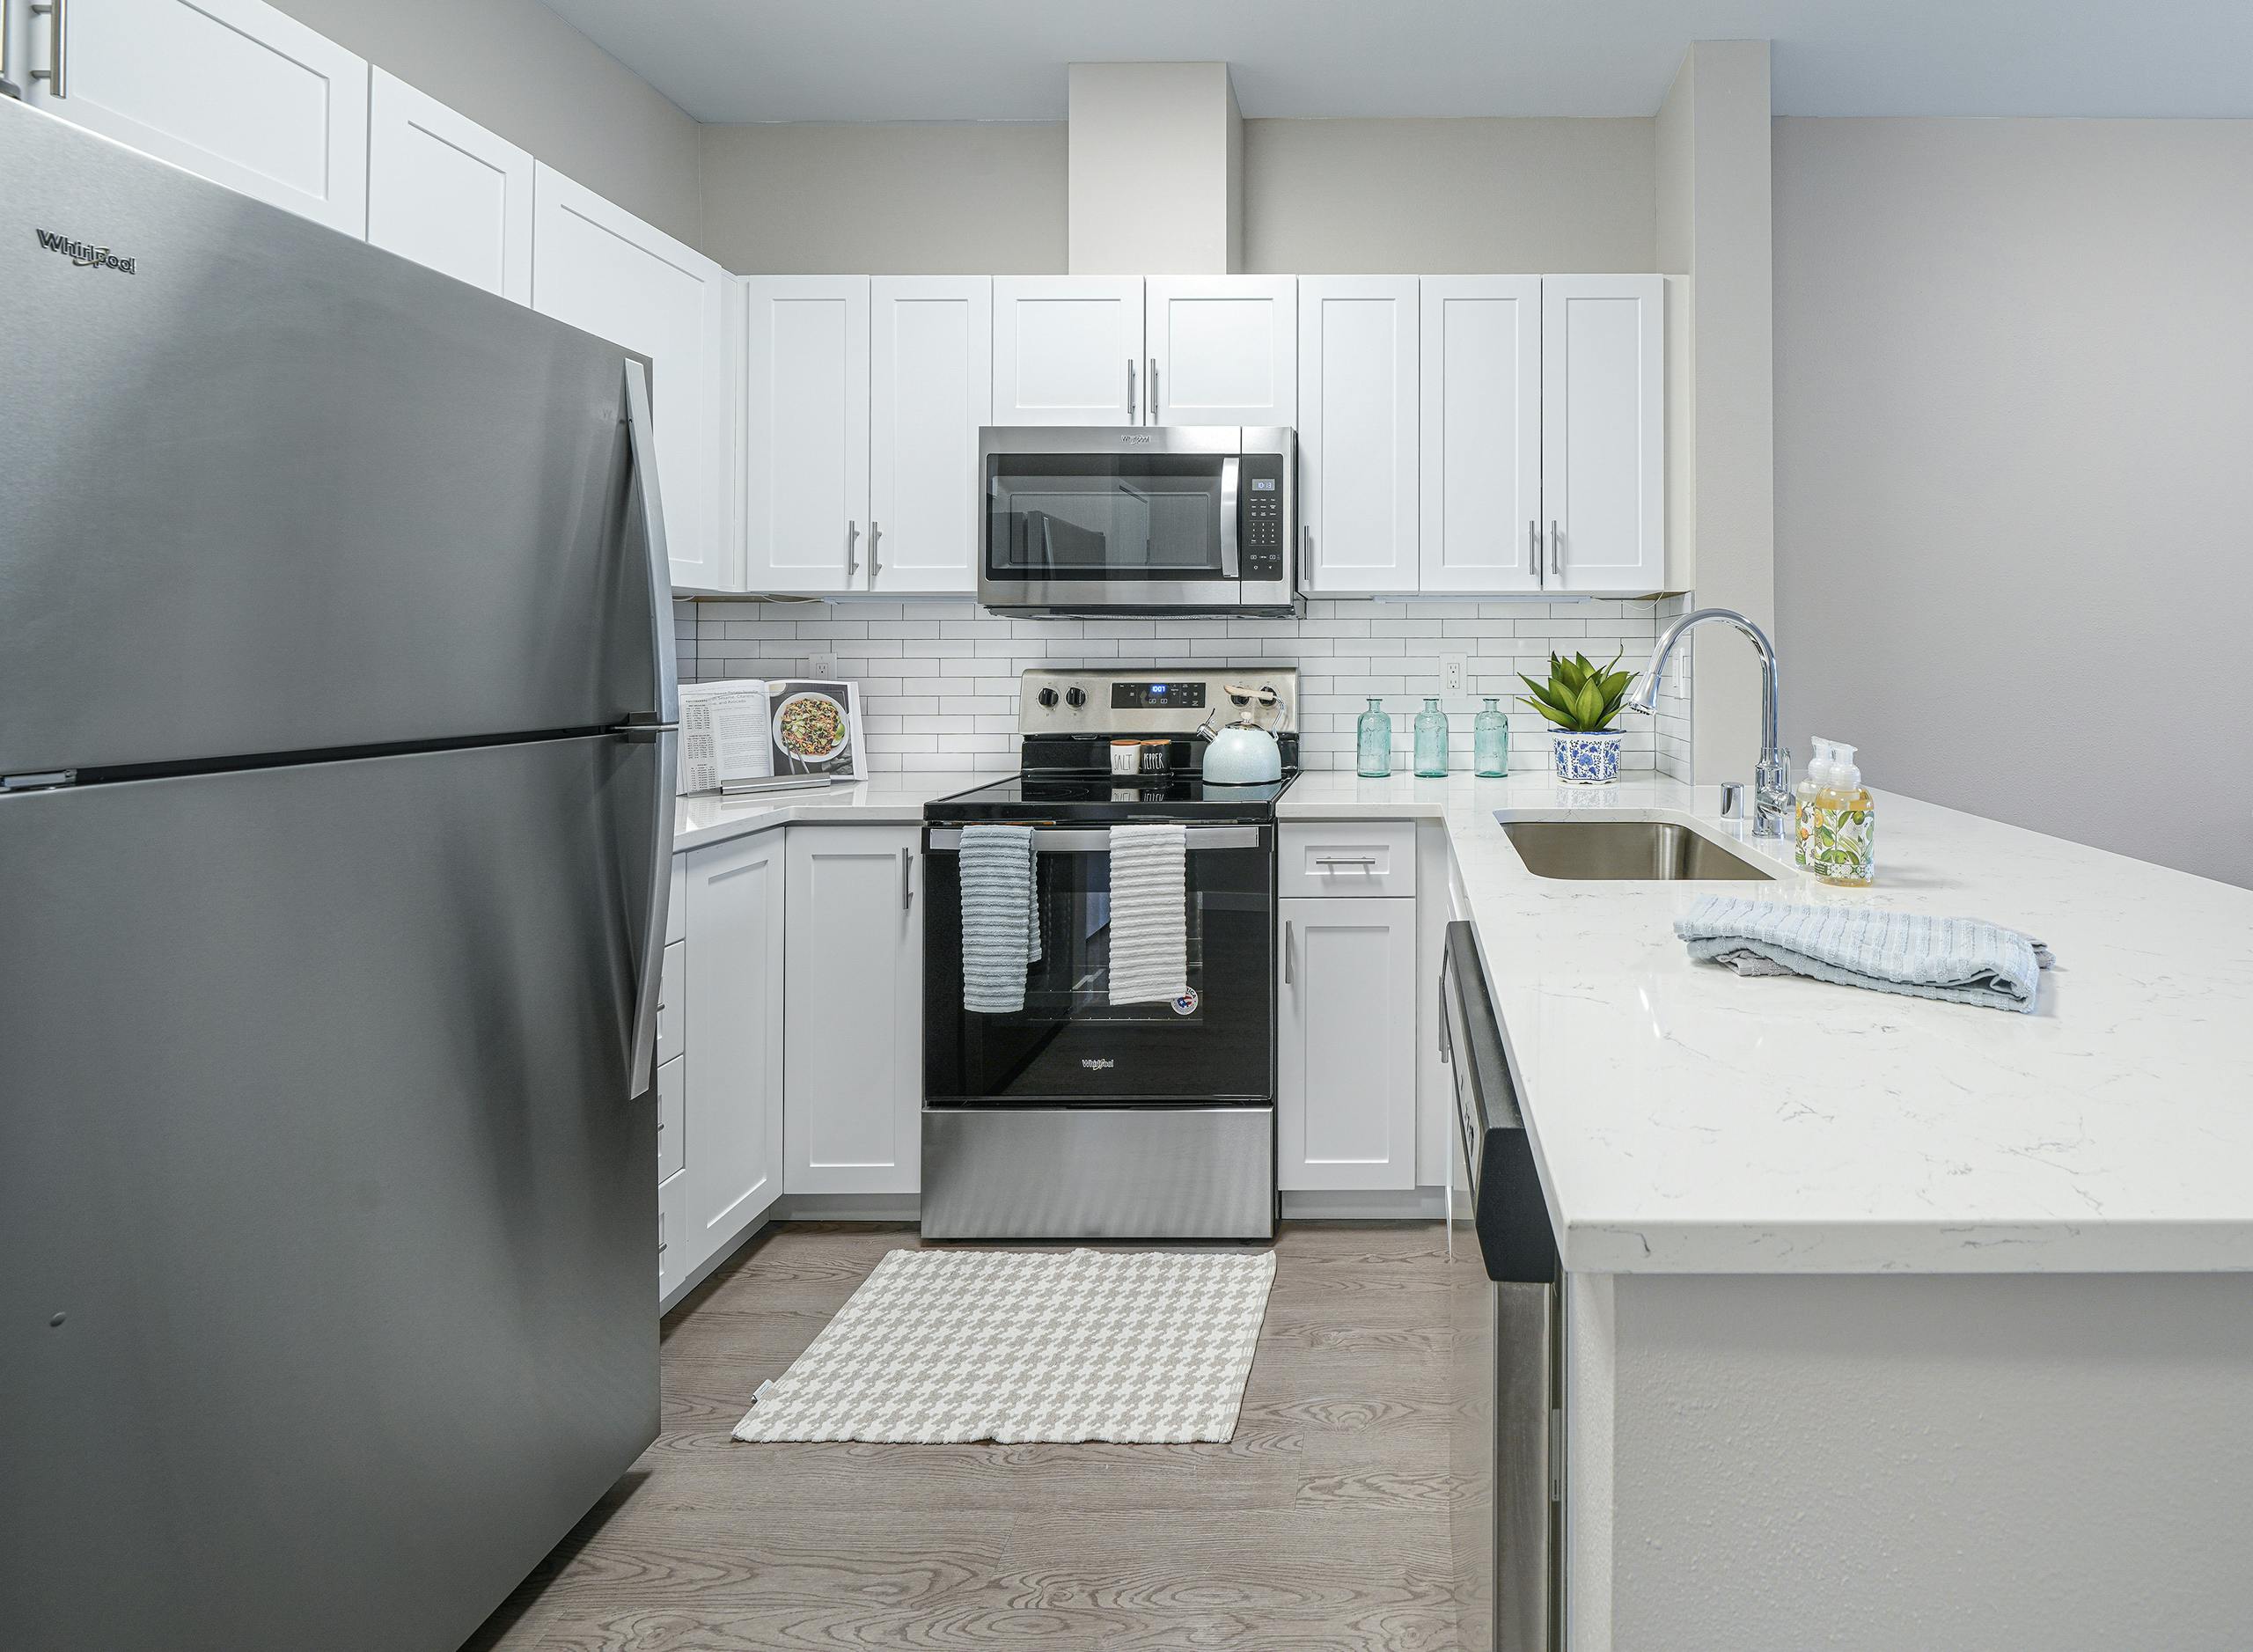 AMLI Bellevue Park apartment kitchen with stainless steel appliances and white cabinets and countertop and tiled backsplash